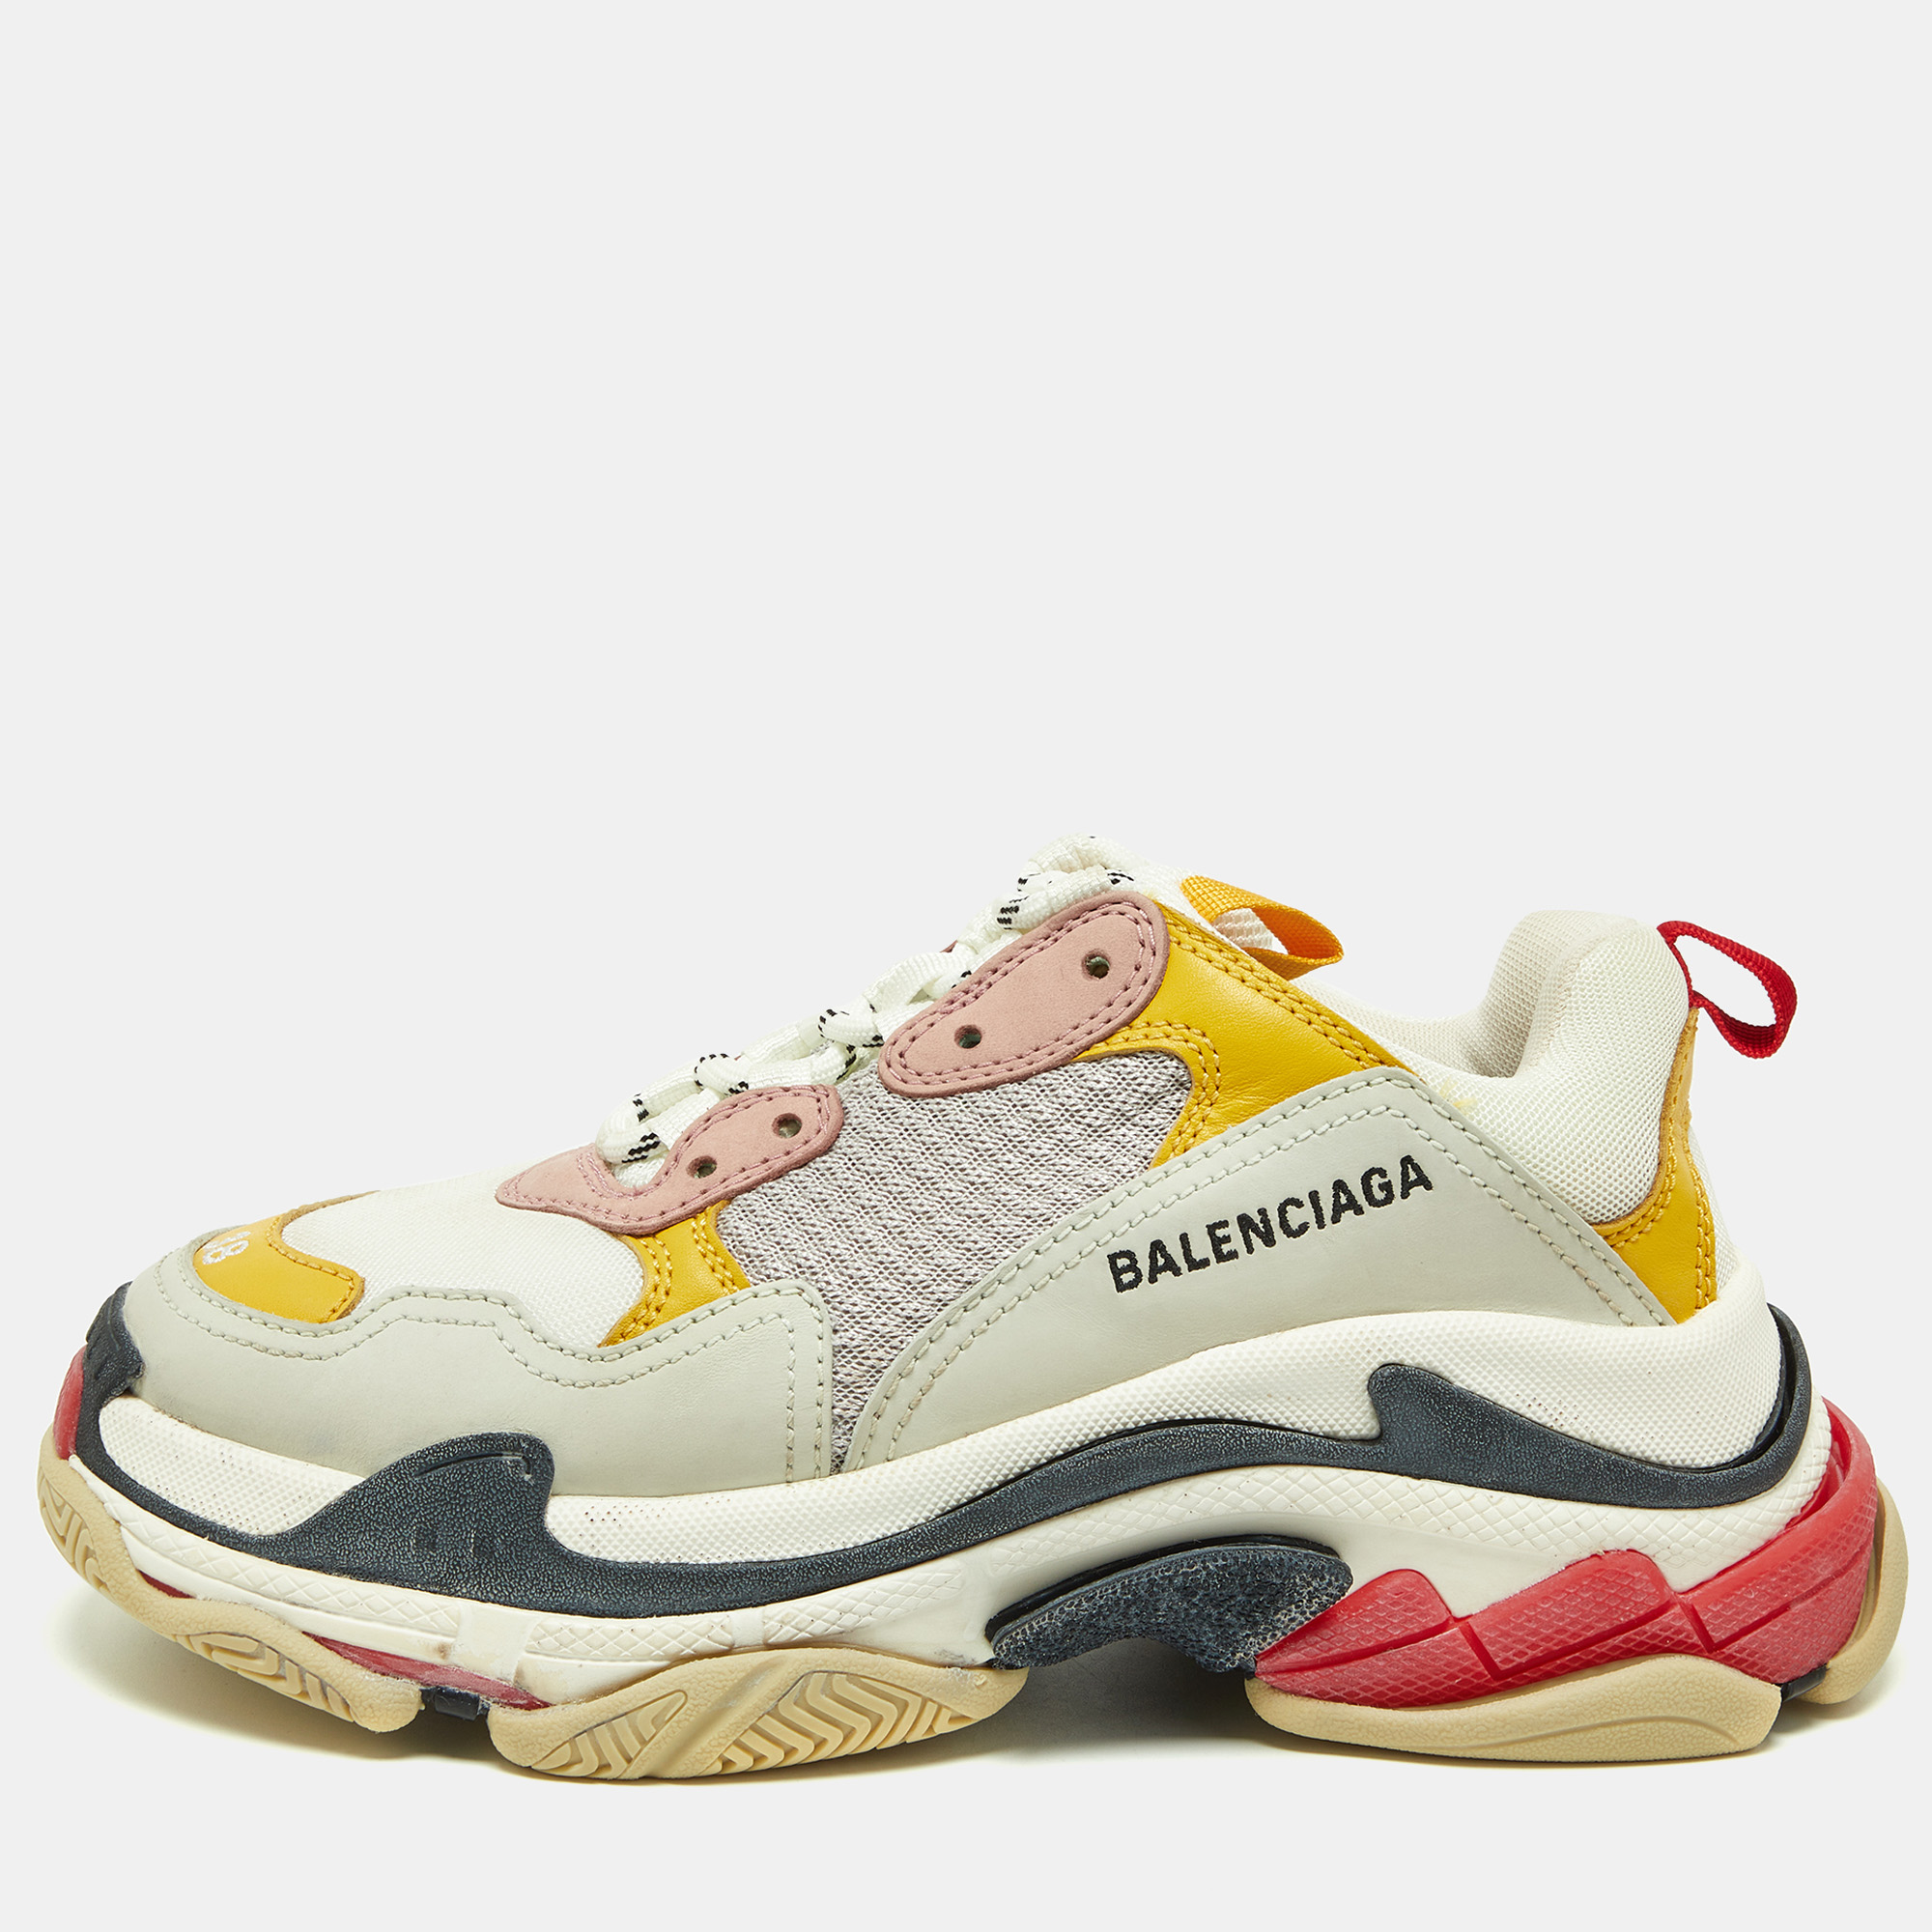 Balenciaga Multicolor Leather And Mesh Triple S Sneakers Size 38